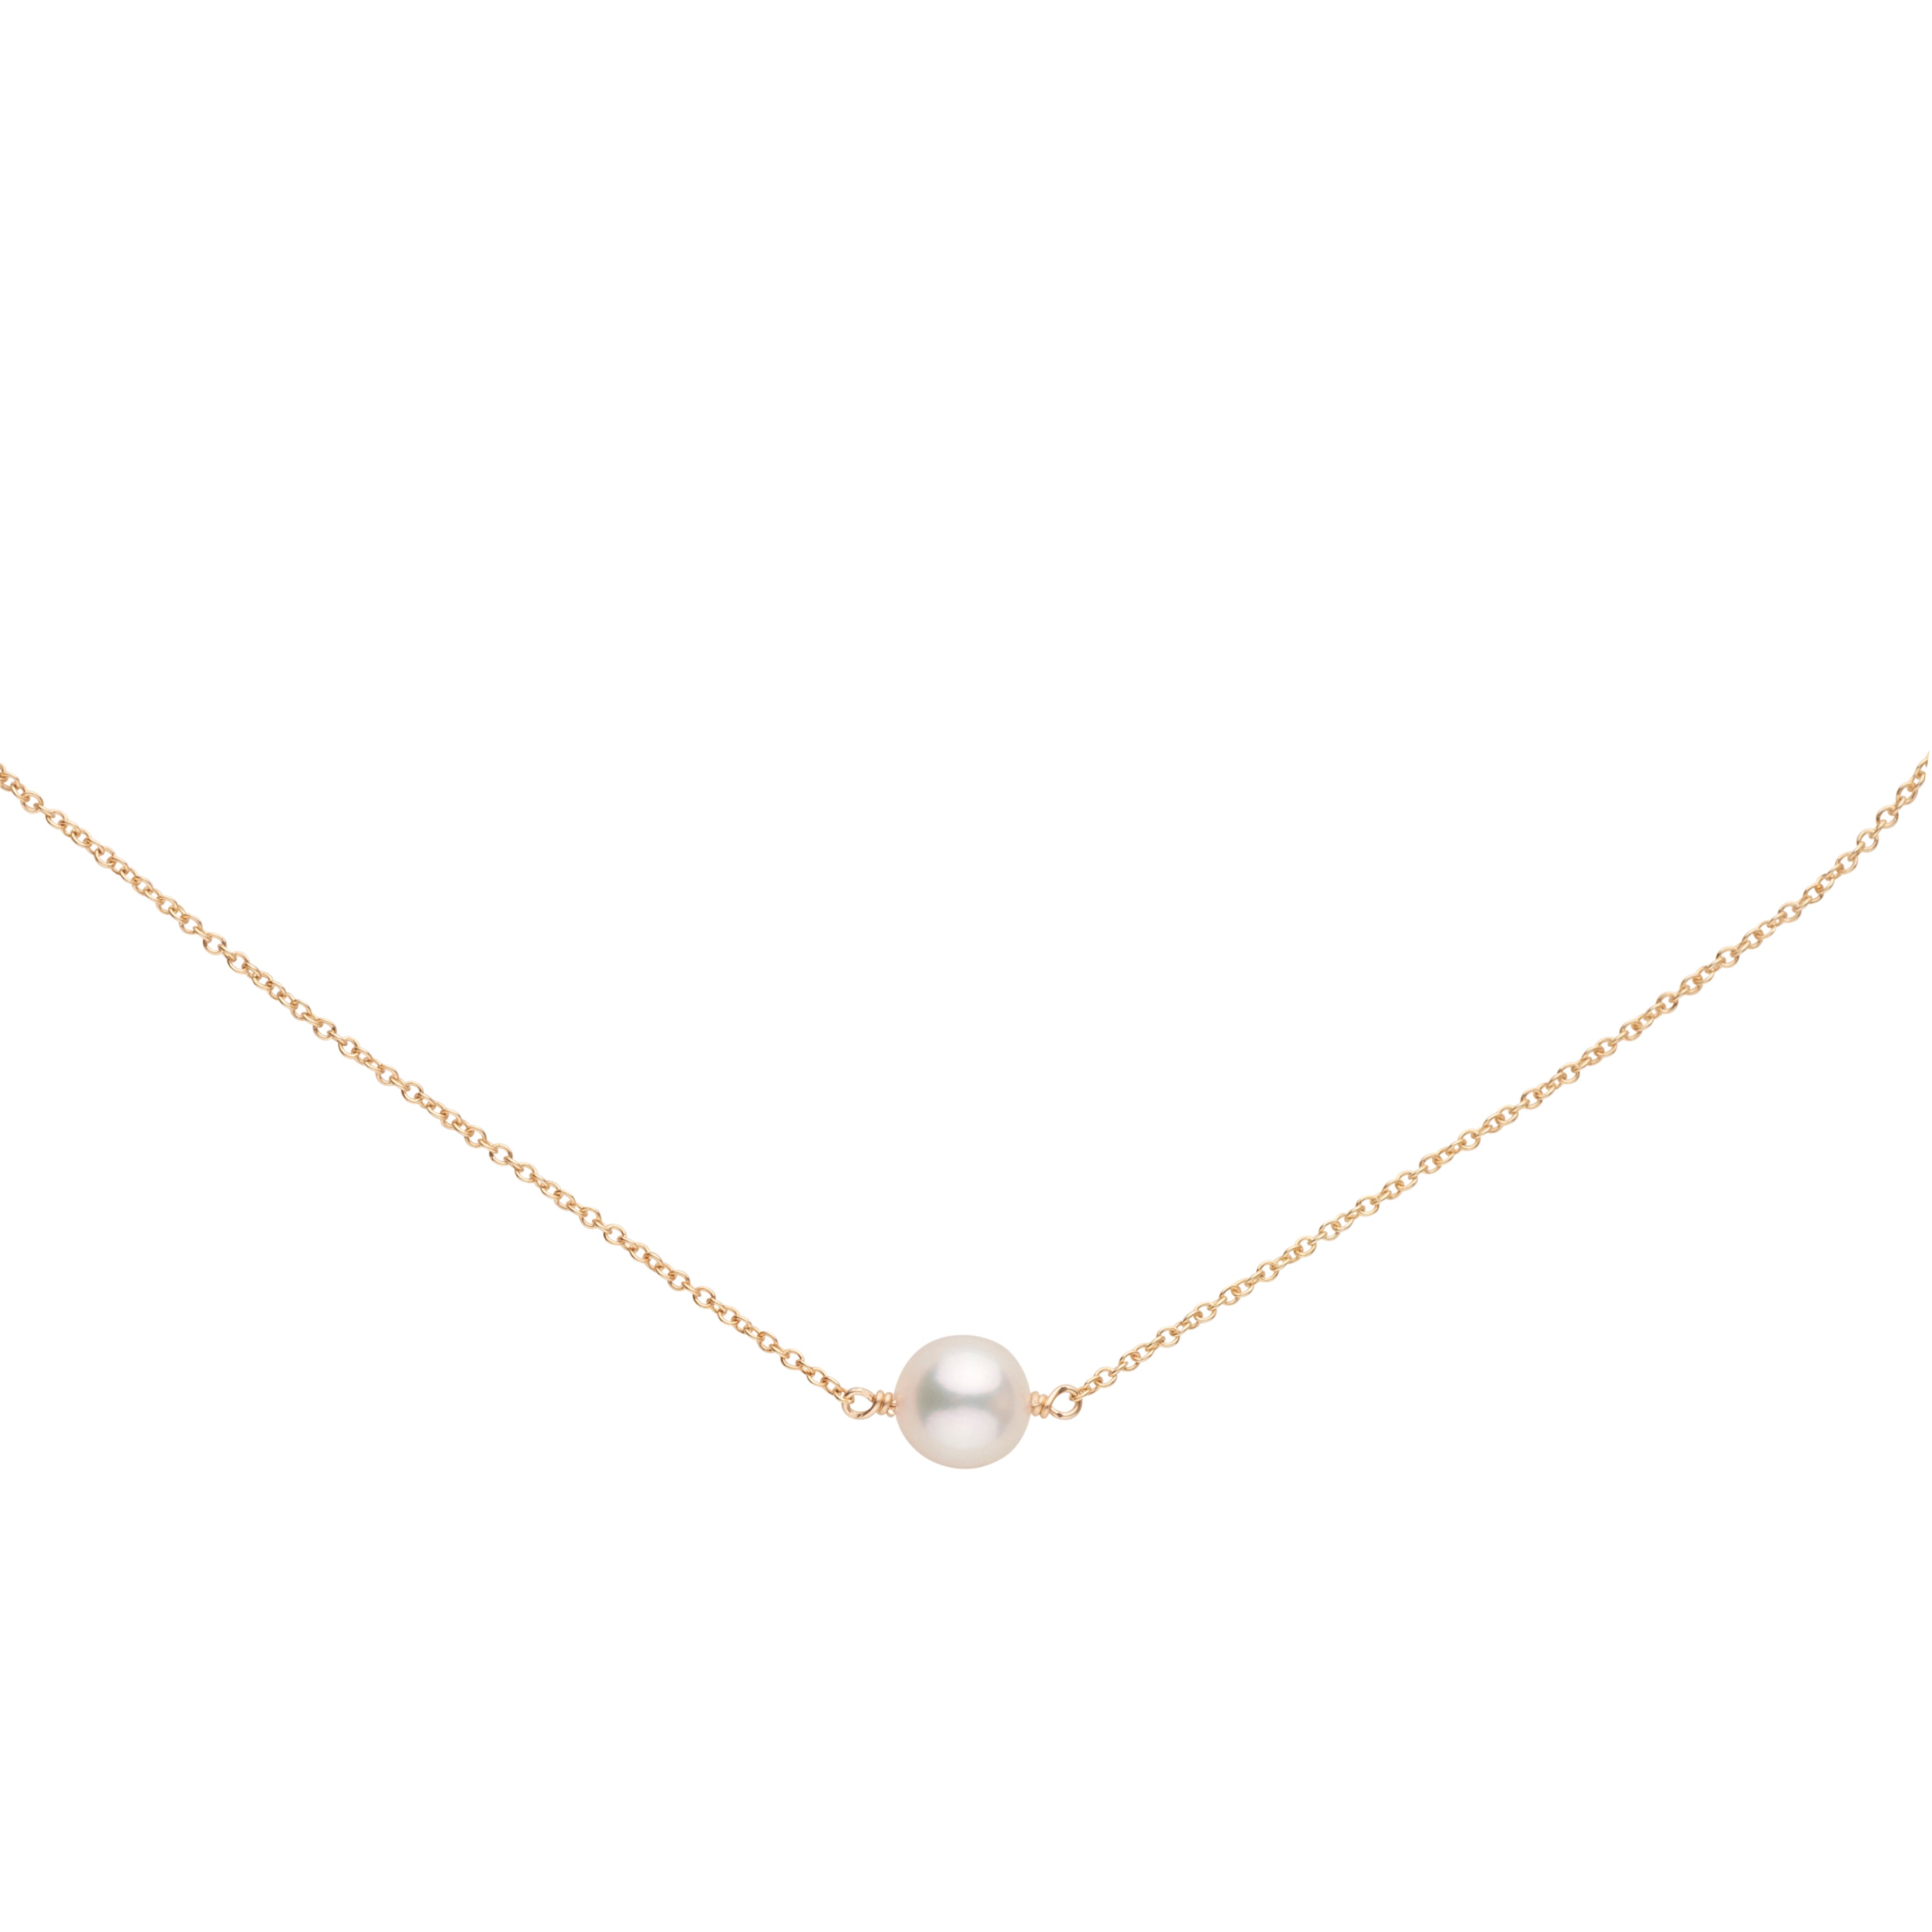 8.5-9.0 mm Akoya Pearl Solitaire Pendant yellow close up